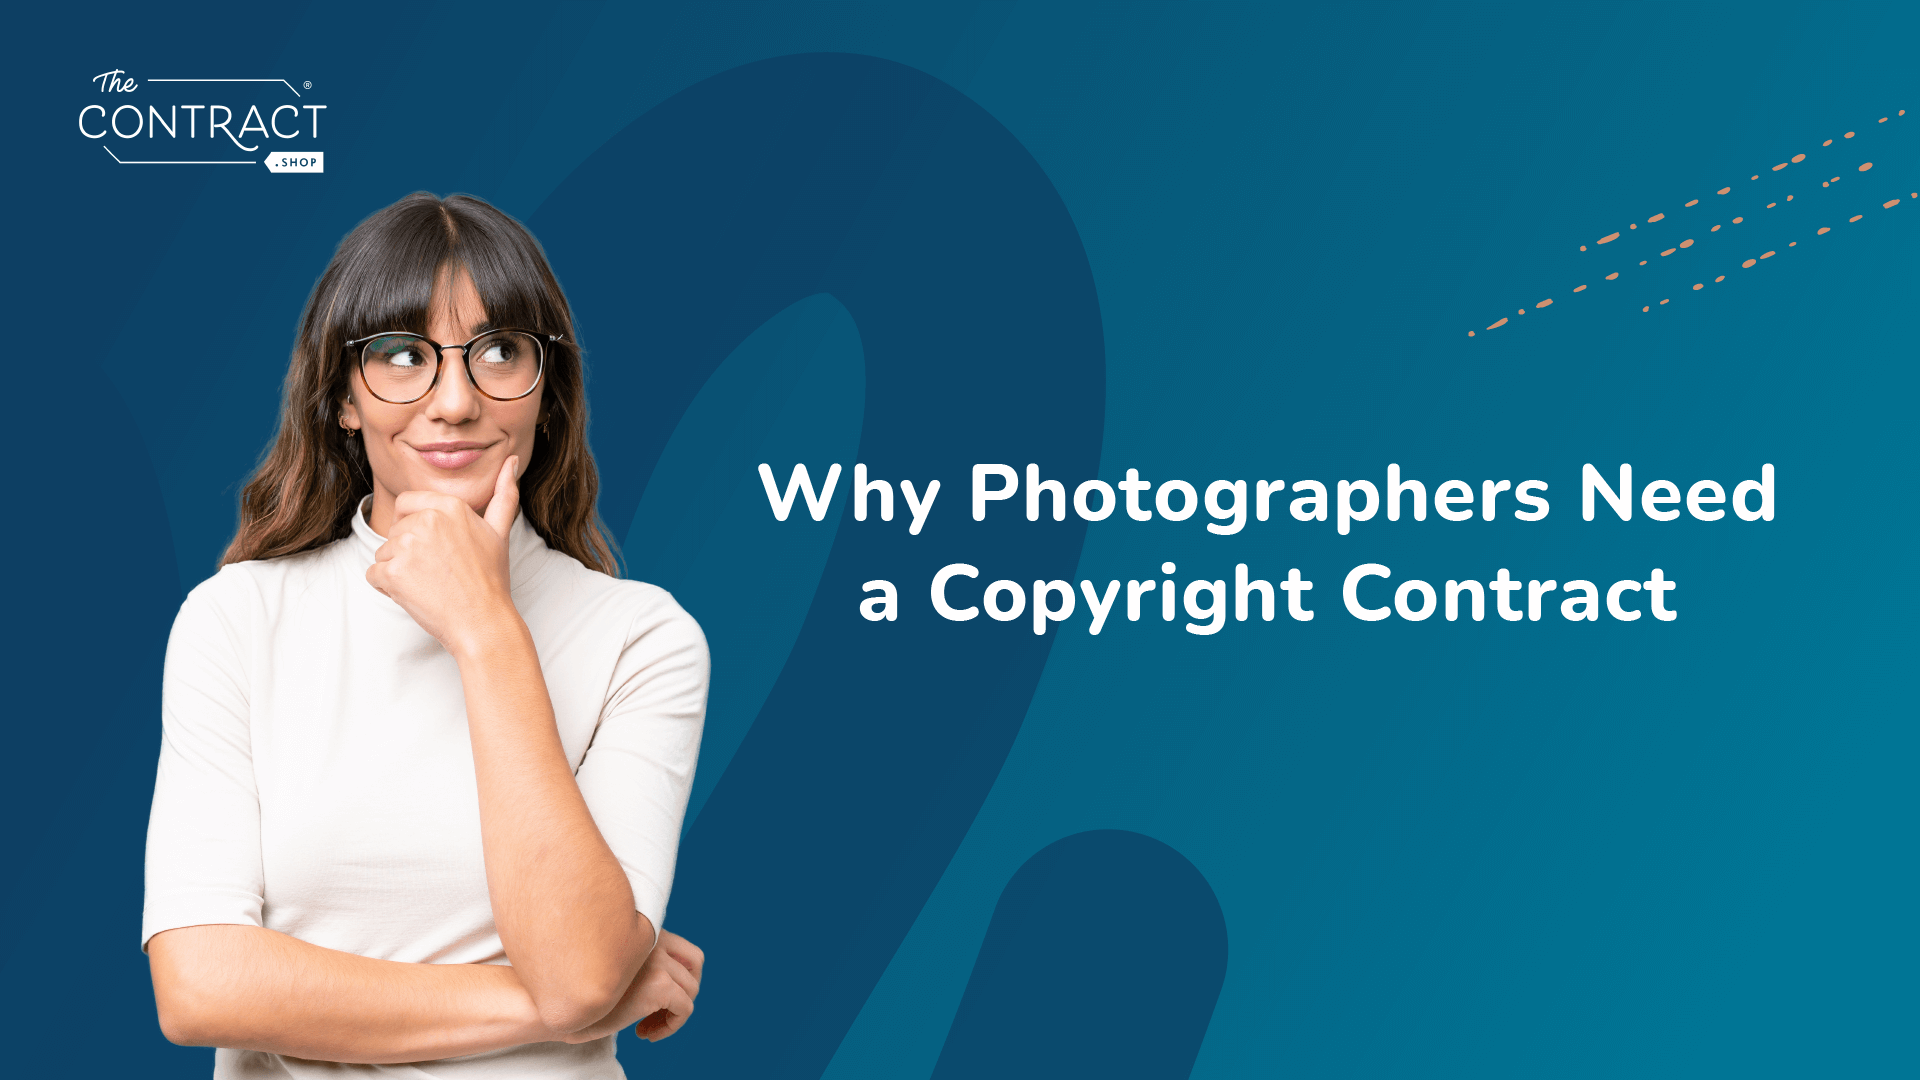 Why Photographers Need a Copyright Contract